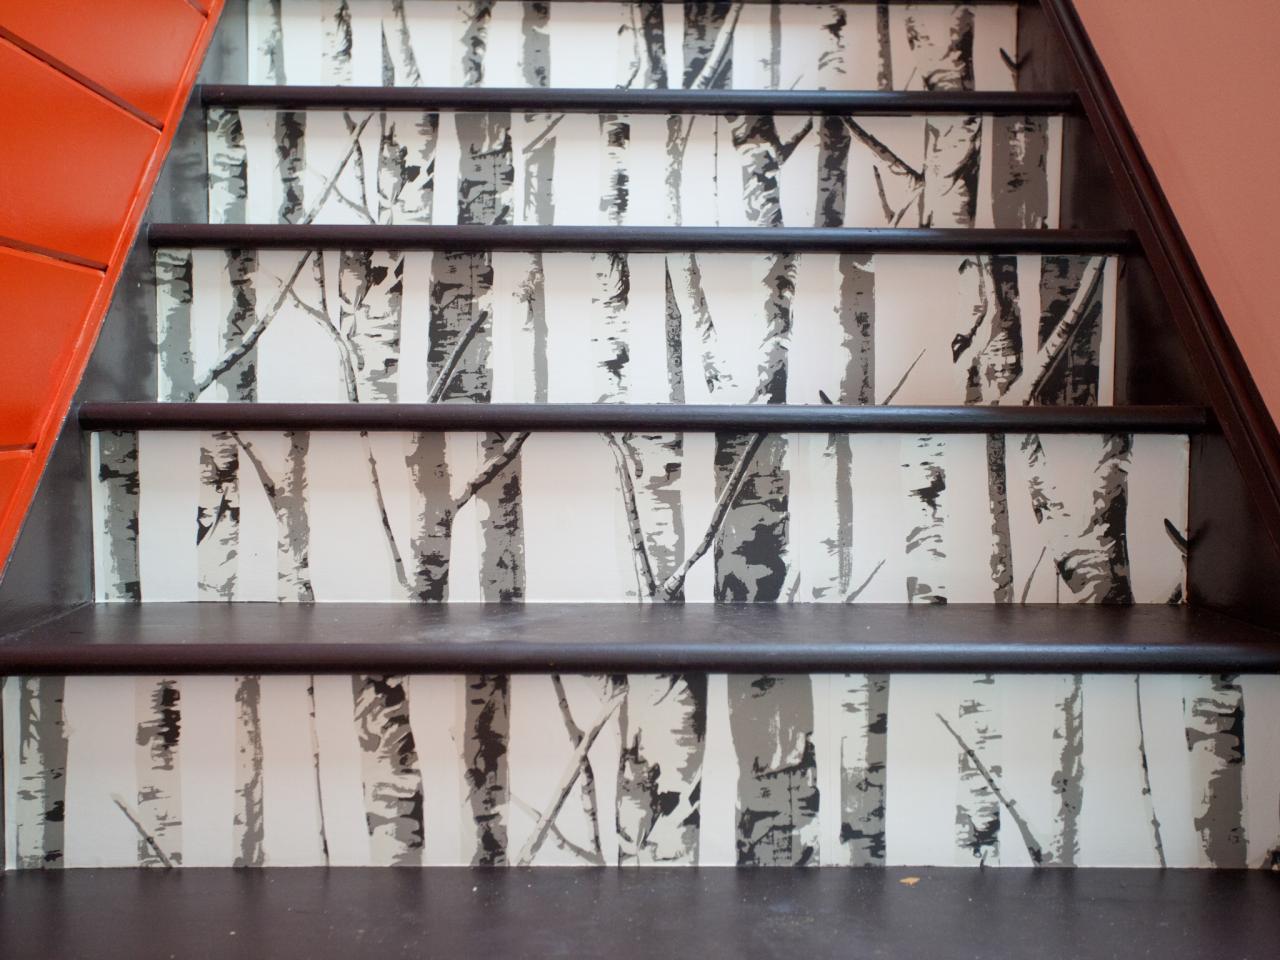 Wallpaper Your Stair Risers